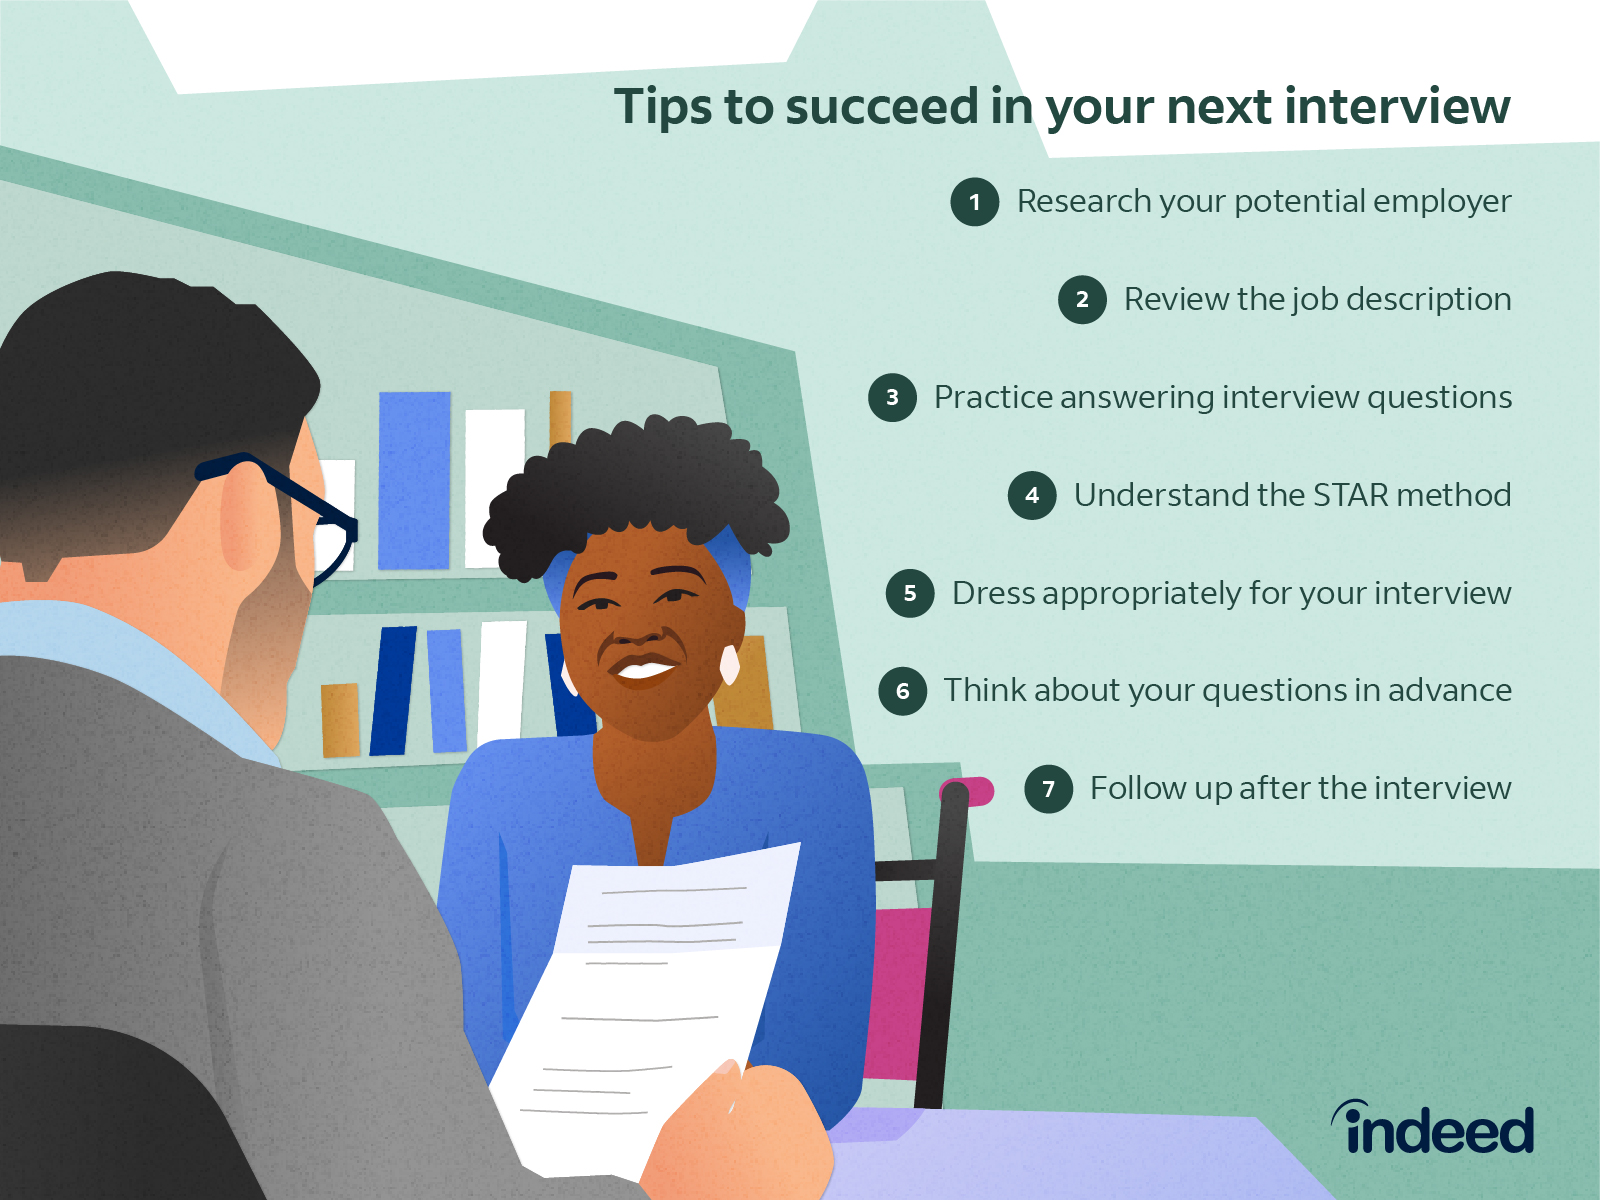 Three Steps to Creating a Great Interview Structure